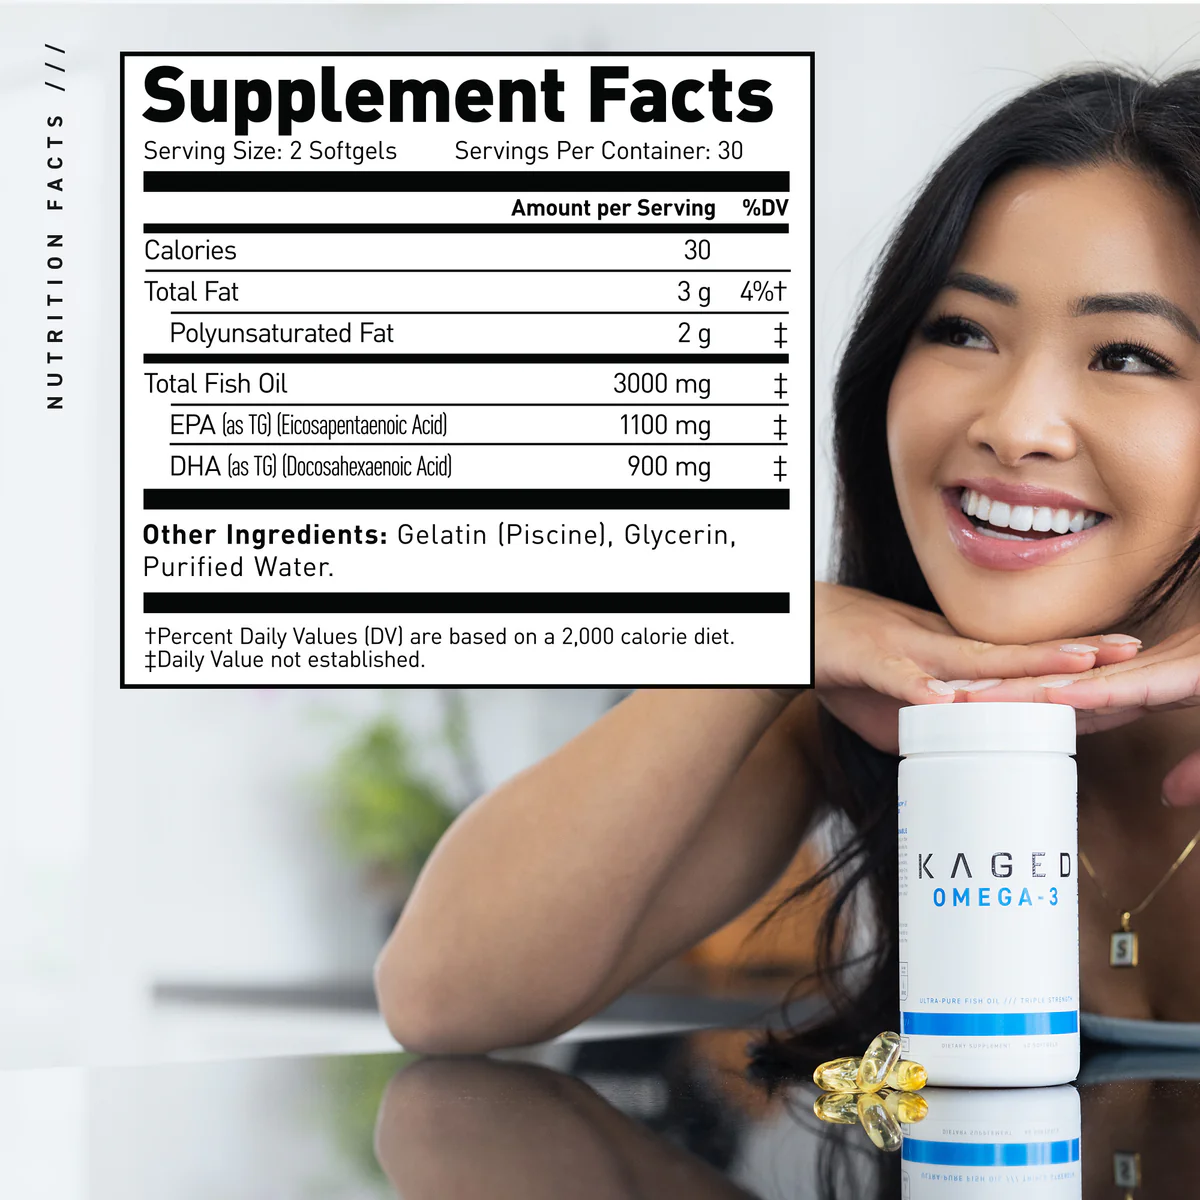 Kaged Omega supplement facts